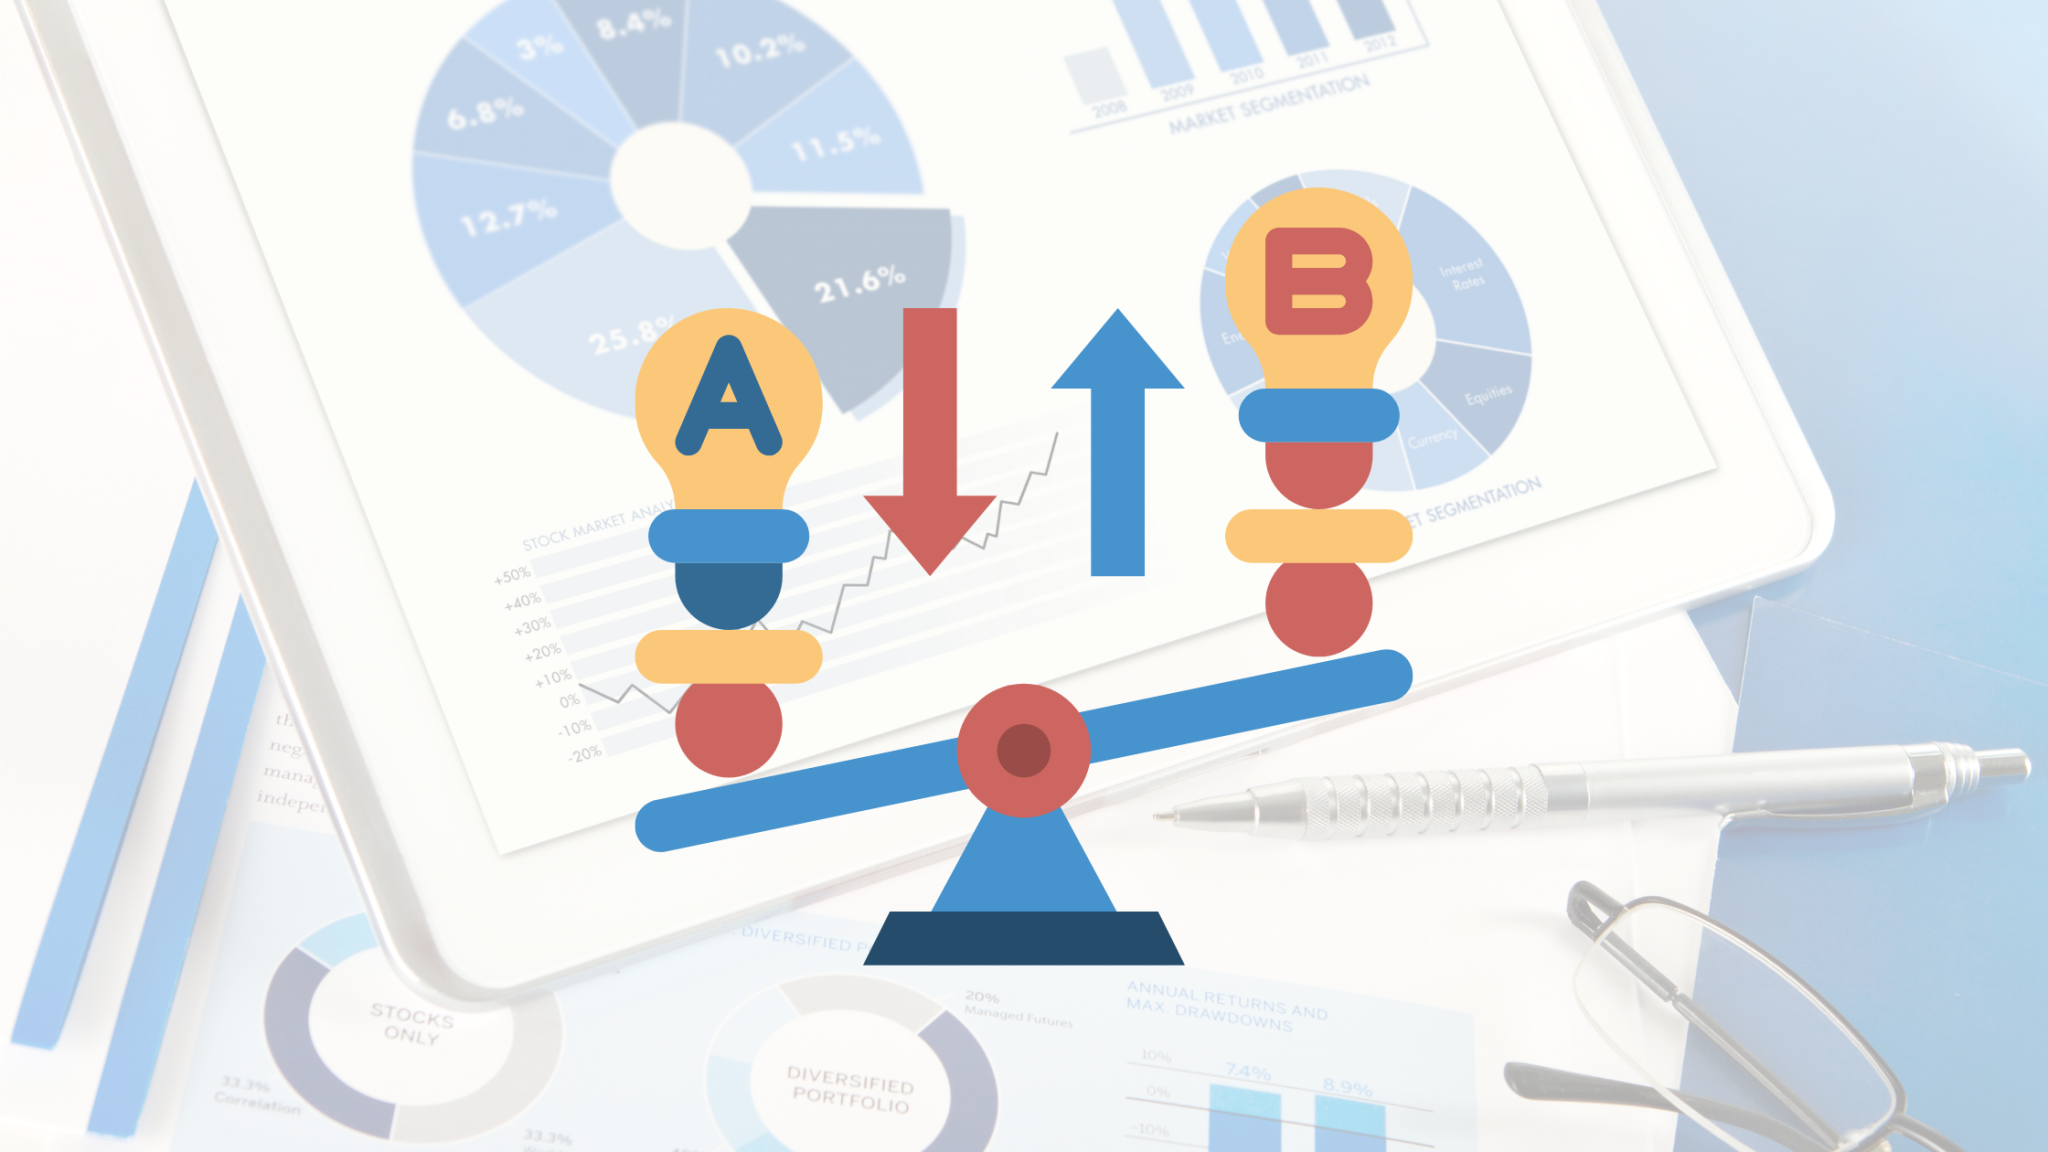 You are currently viewing A/B Testing in Digital Marketing: The Secret Sauce for Small Businesses